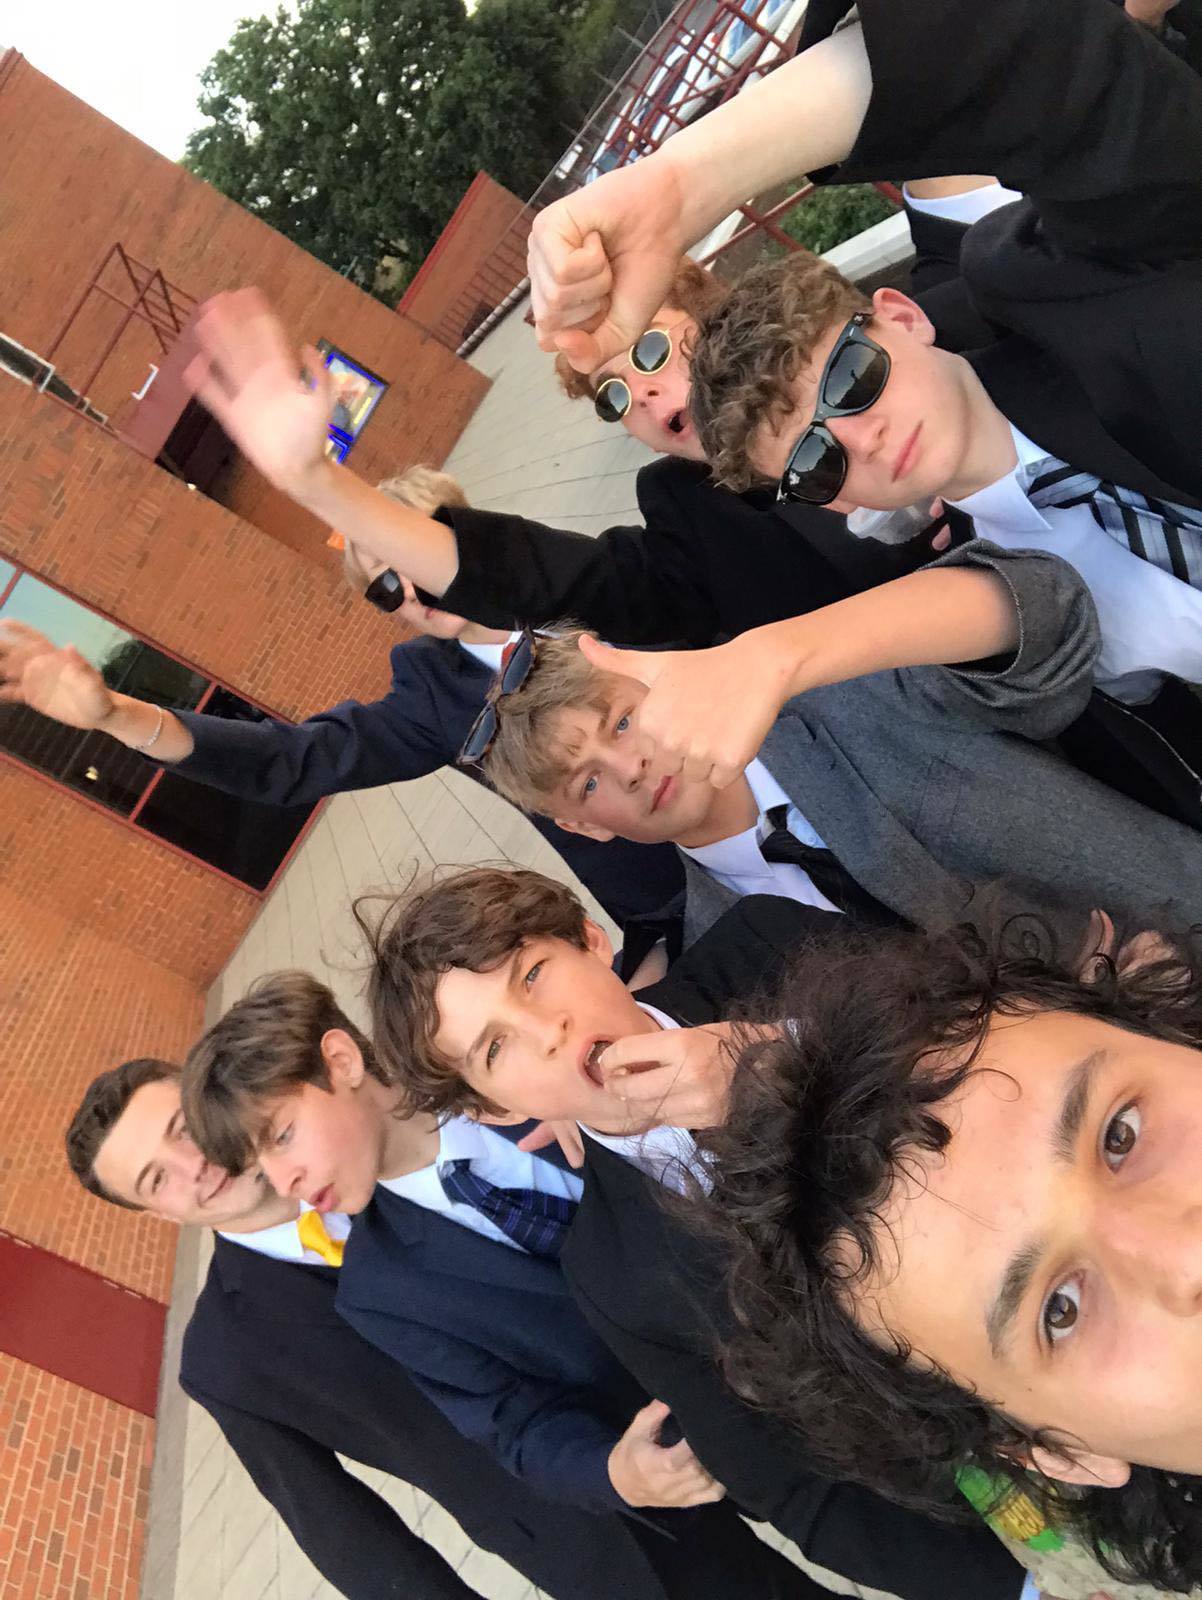 Ryan Wade, 13, poses with the suited and booted teenagers outside Showcase Cinema